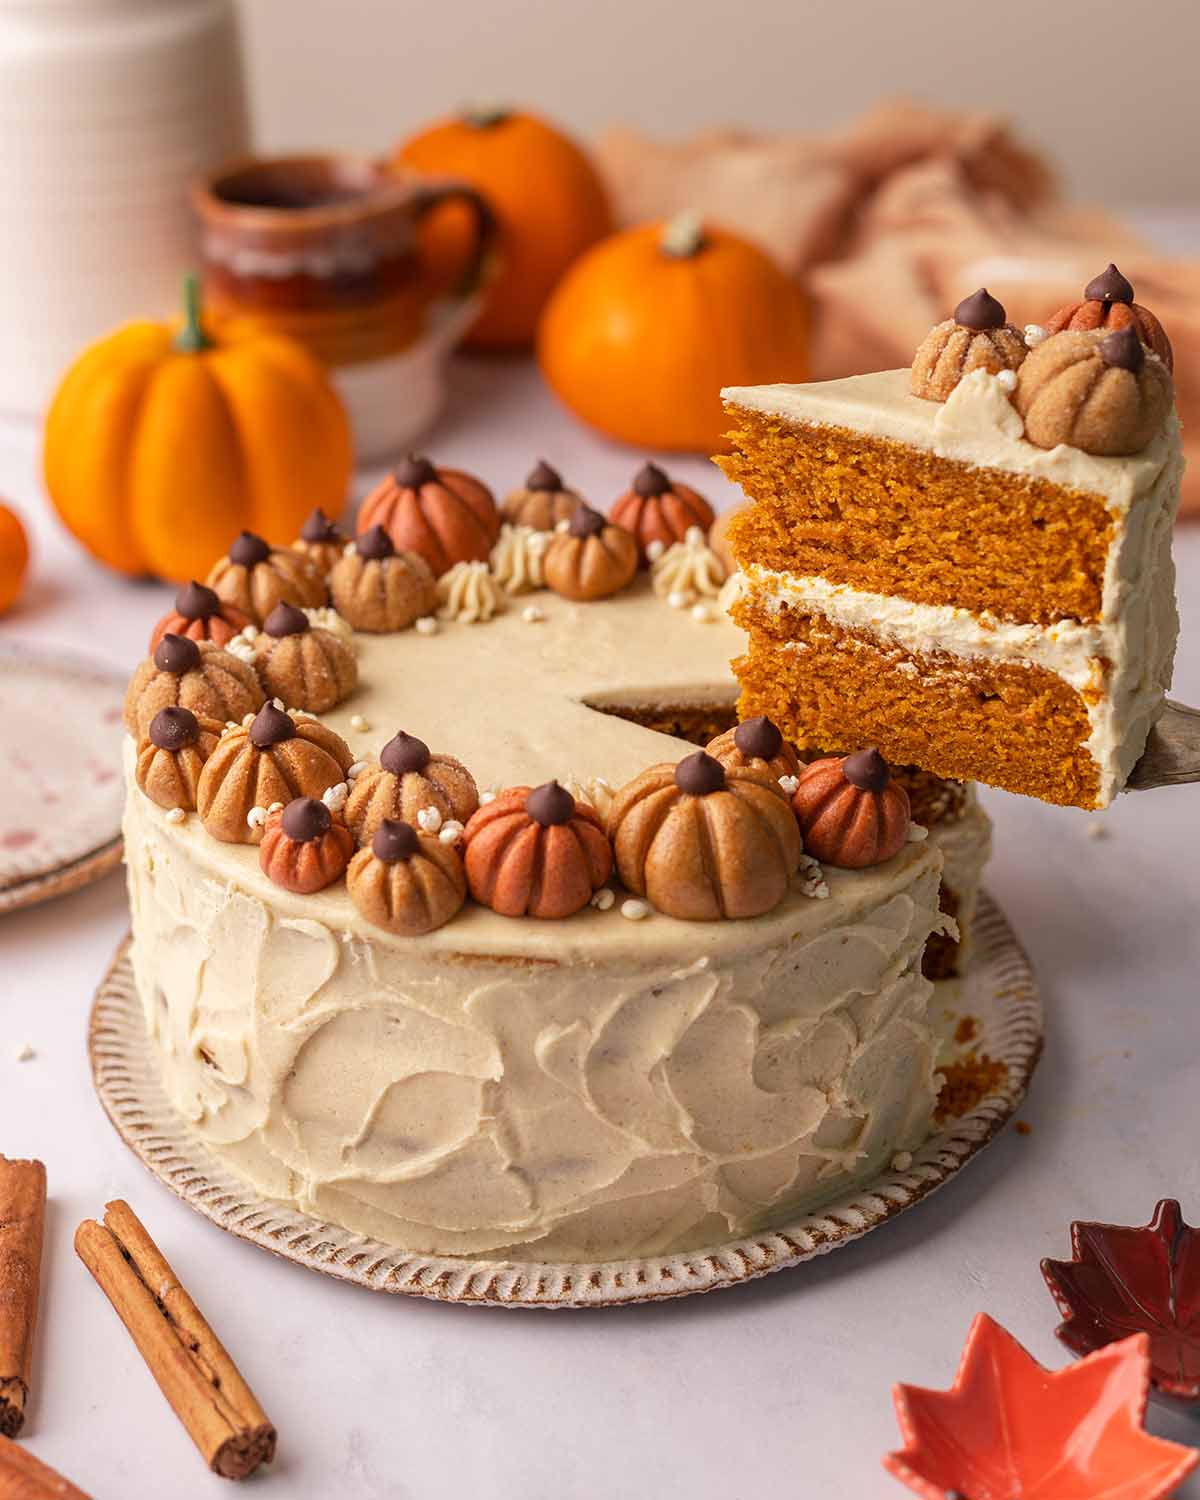 Cake decorated with mini orange and brown pumpkins and with one cake slice cut out being lifted up.